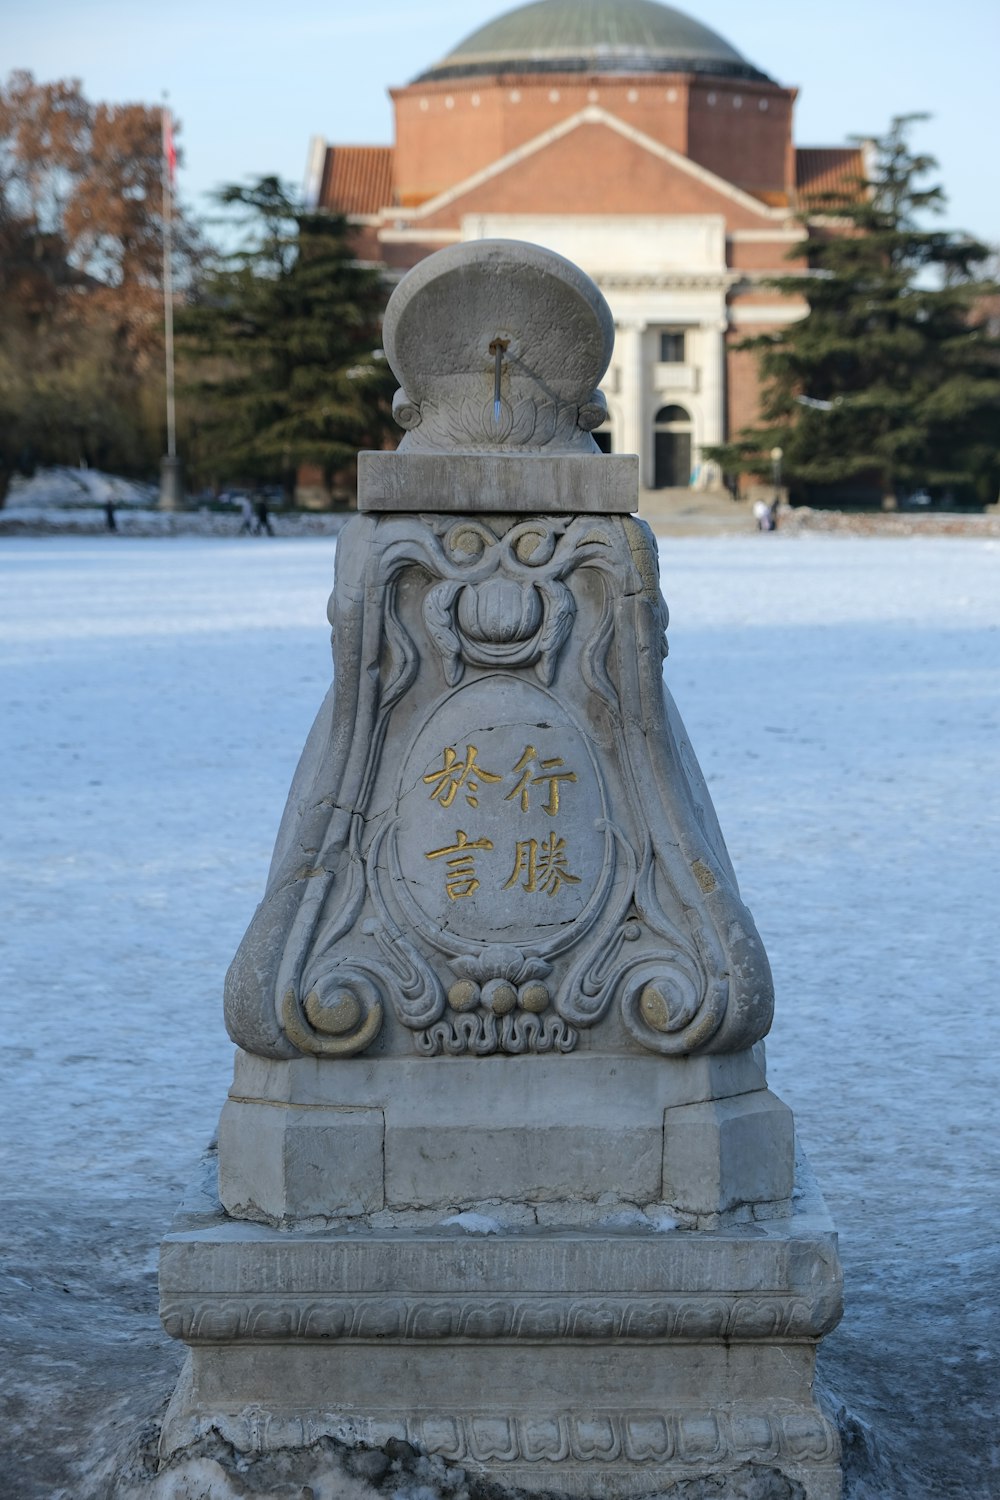 a statue in front of a building on a snowy day